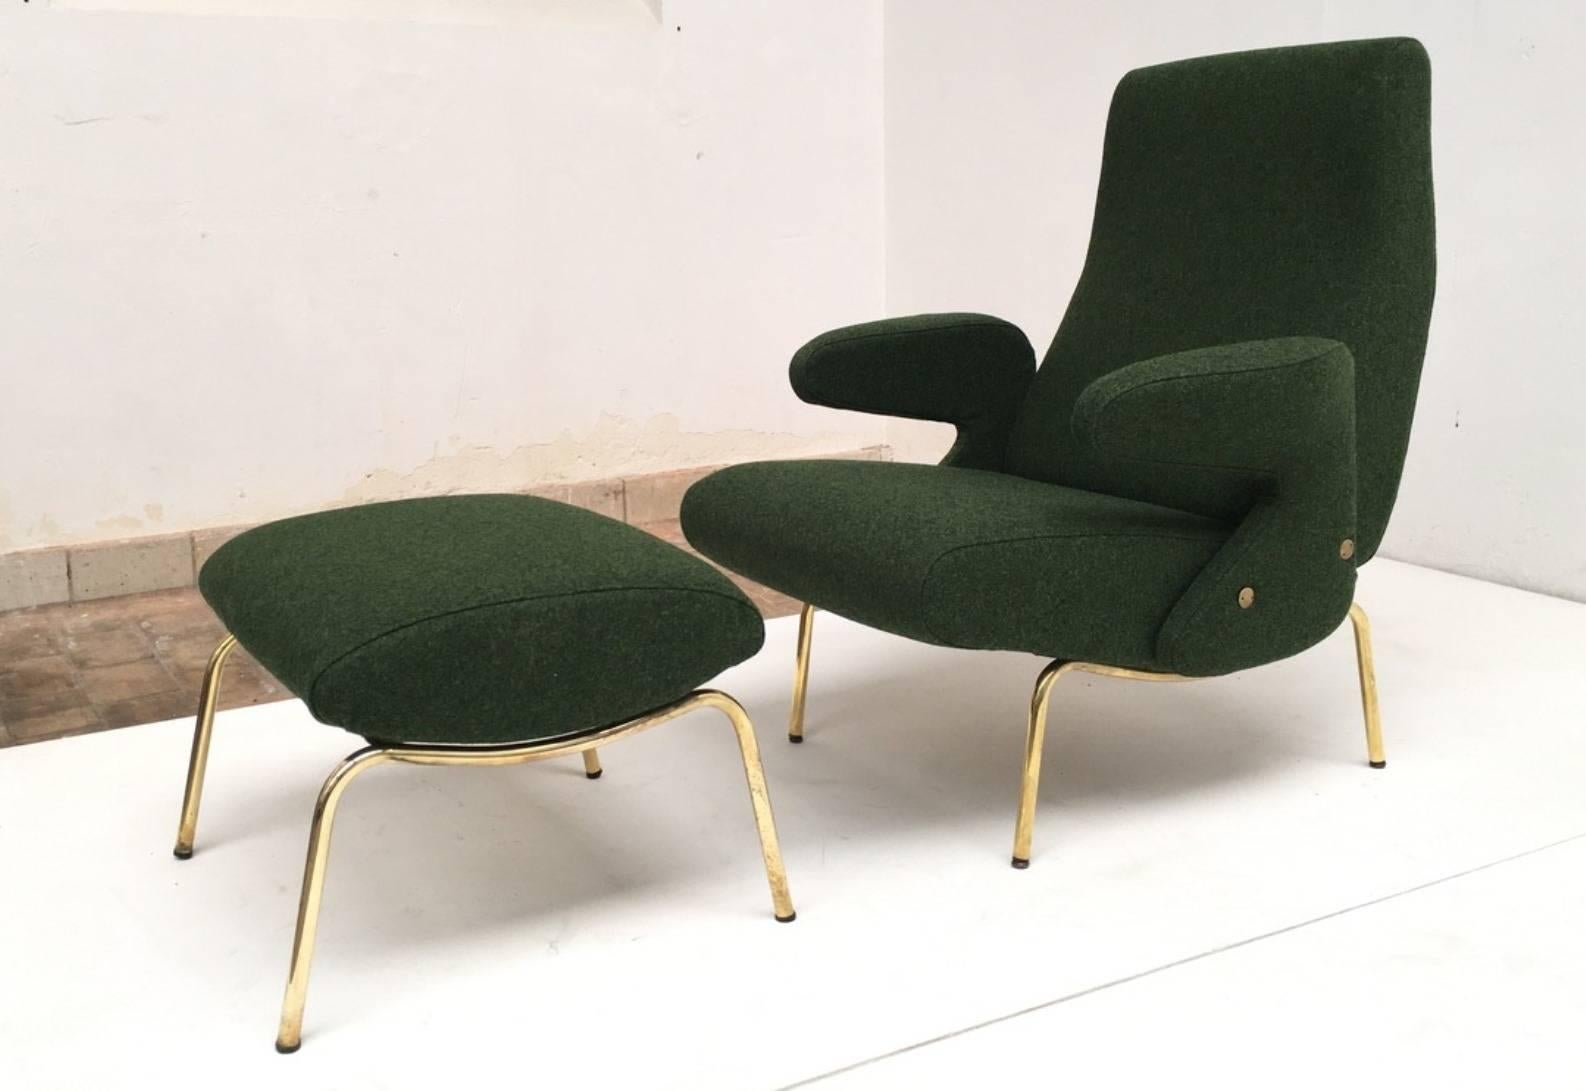 Beautiful biomorphic form 'DELFINO' (Dolphin) lounge chair with armrests complete with the rare matching ottoman designed by famed Italian. 
Artist, sculptor and graphic designer Erberto Carboni (1899-1984) in 1954 for Arflex, Italy. Both pieces